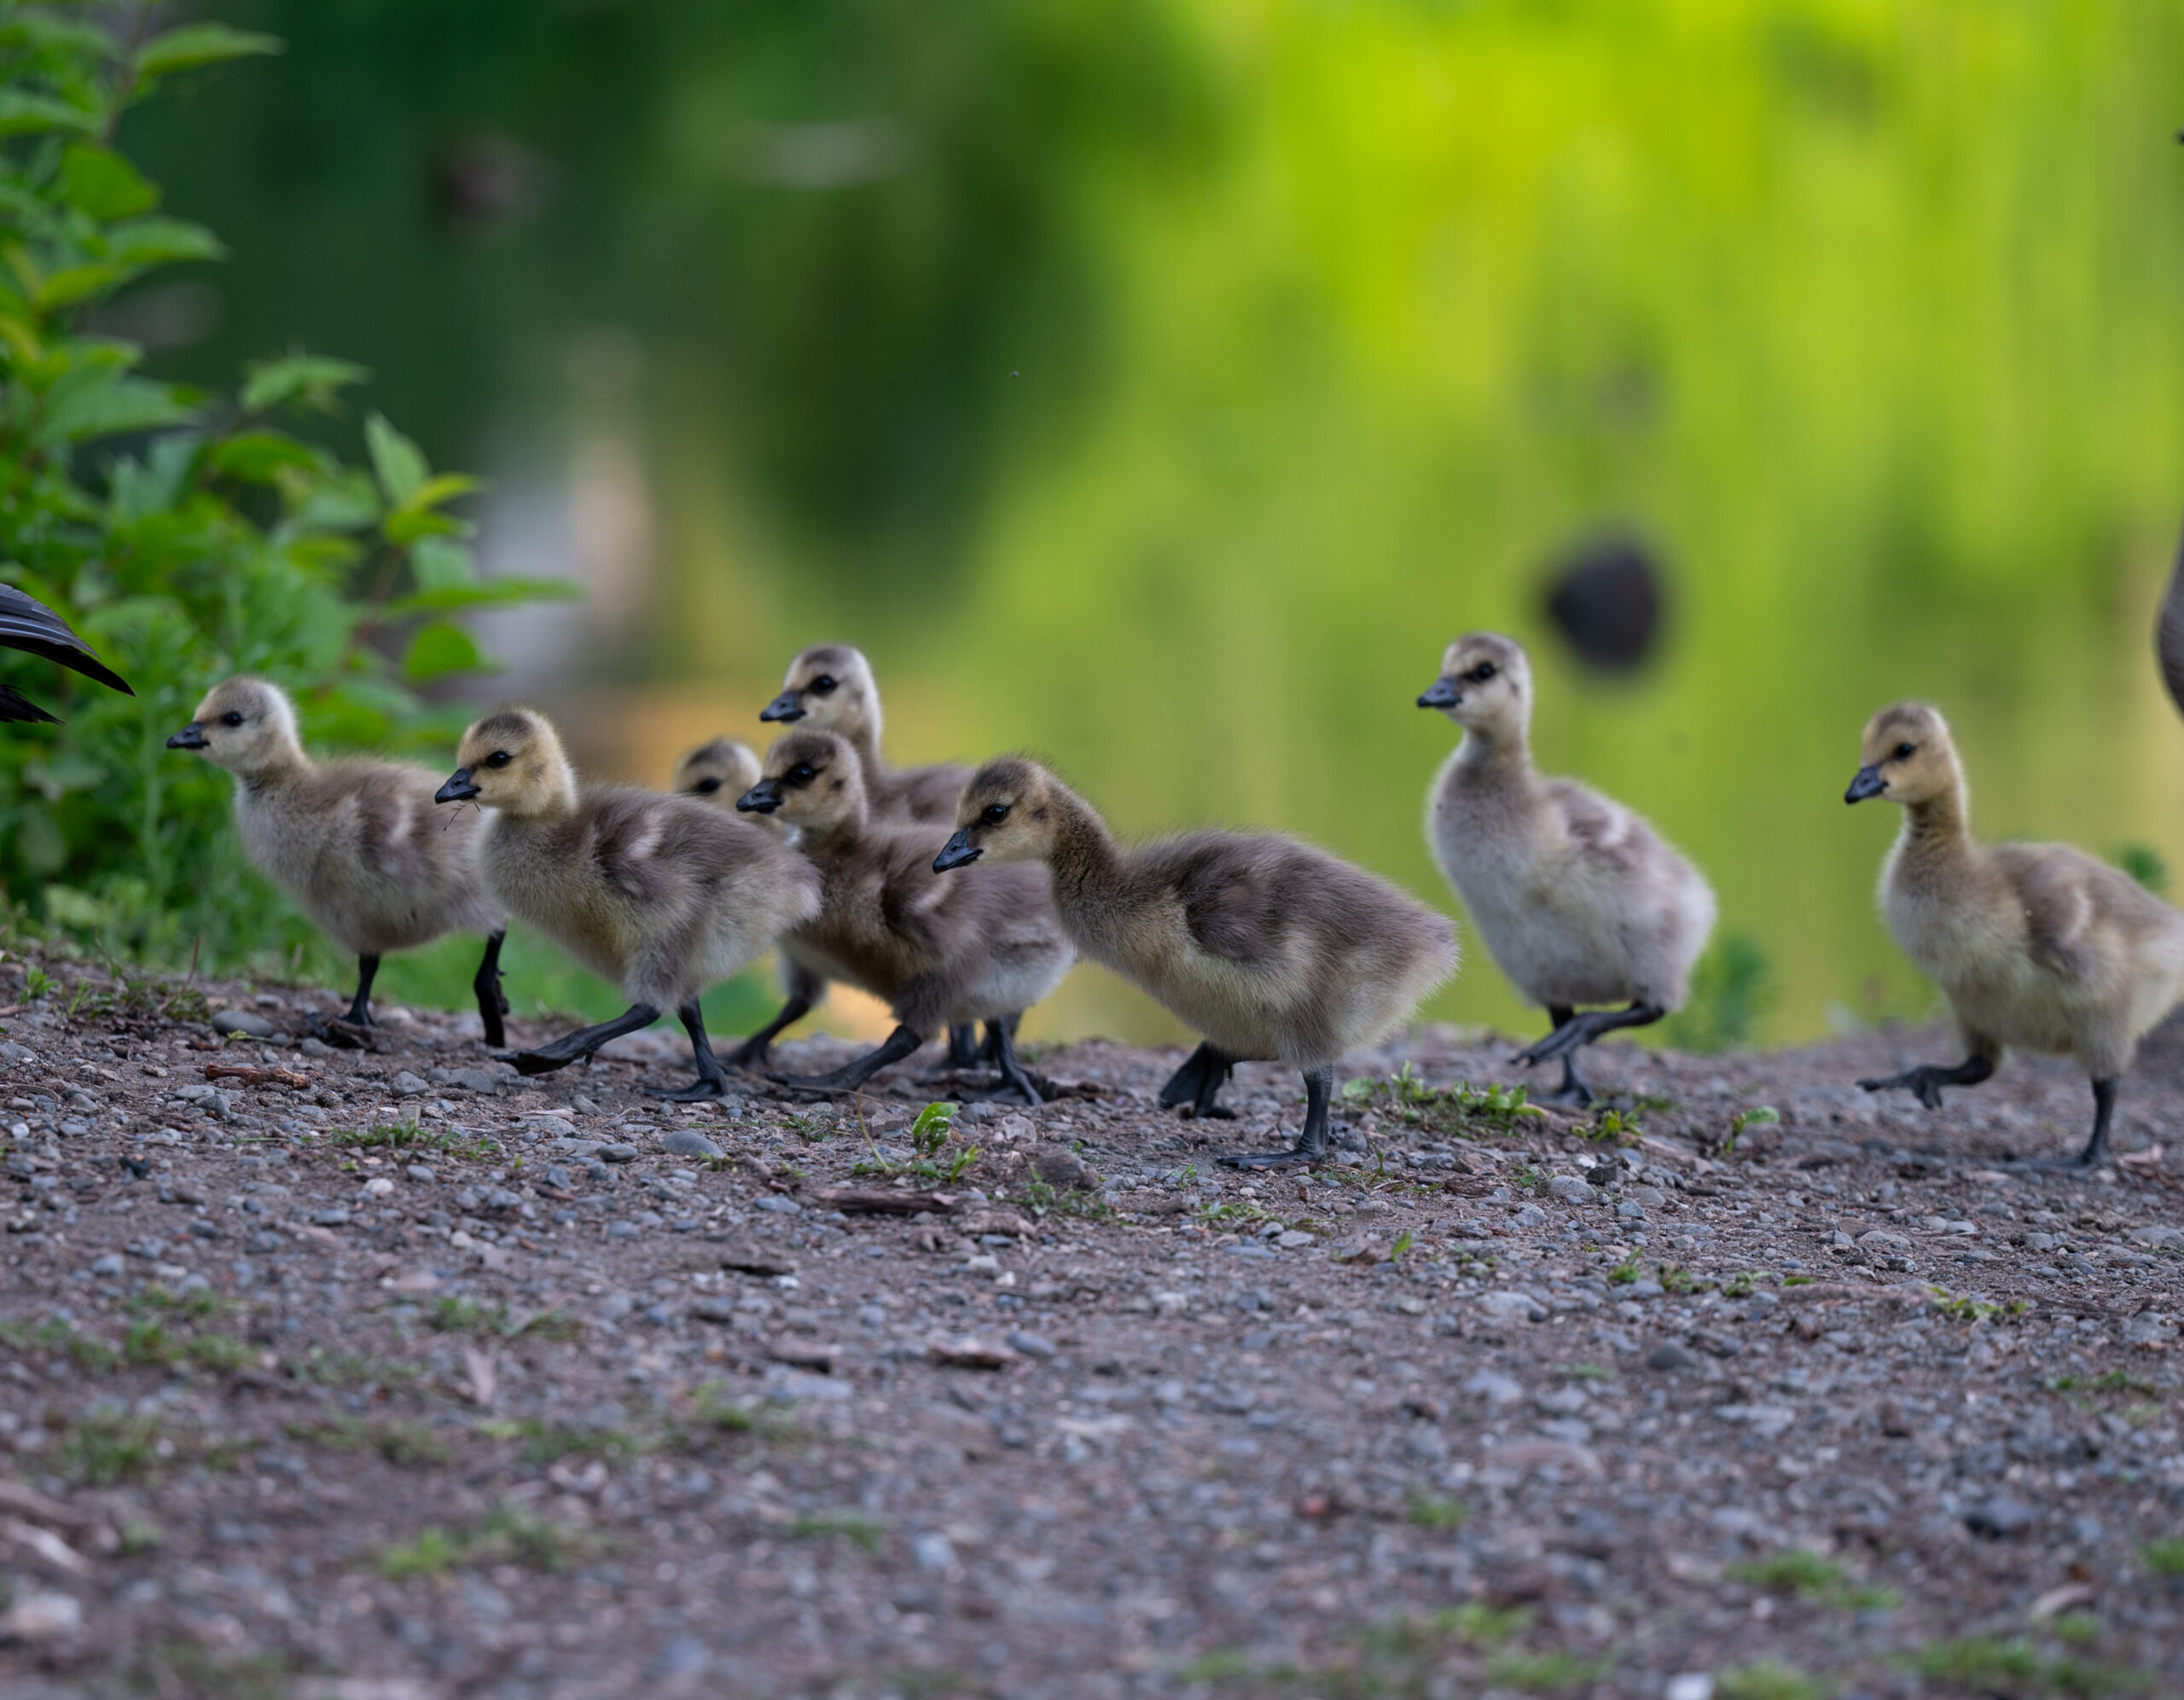 Baby geese.